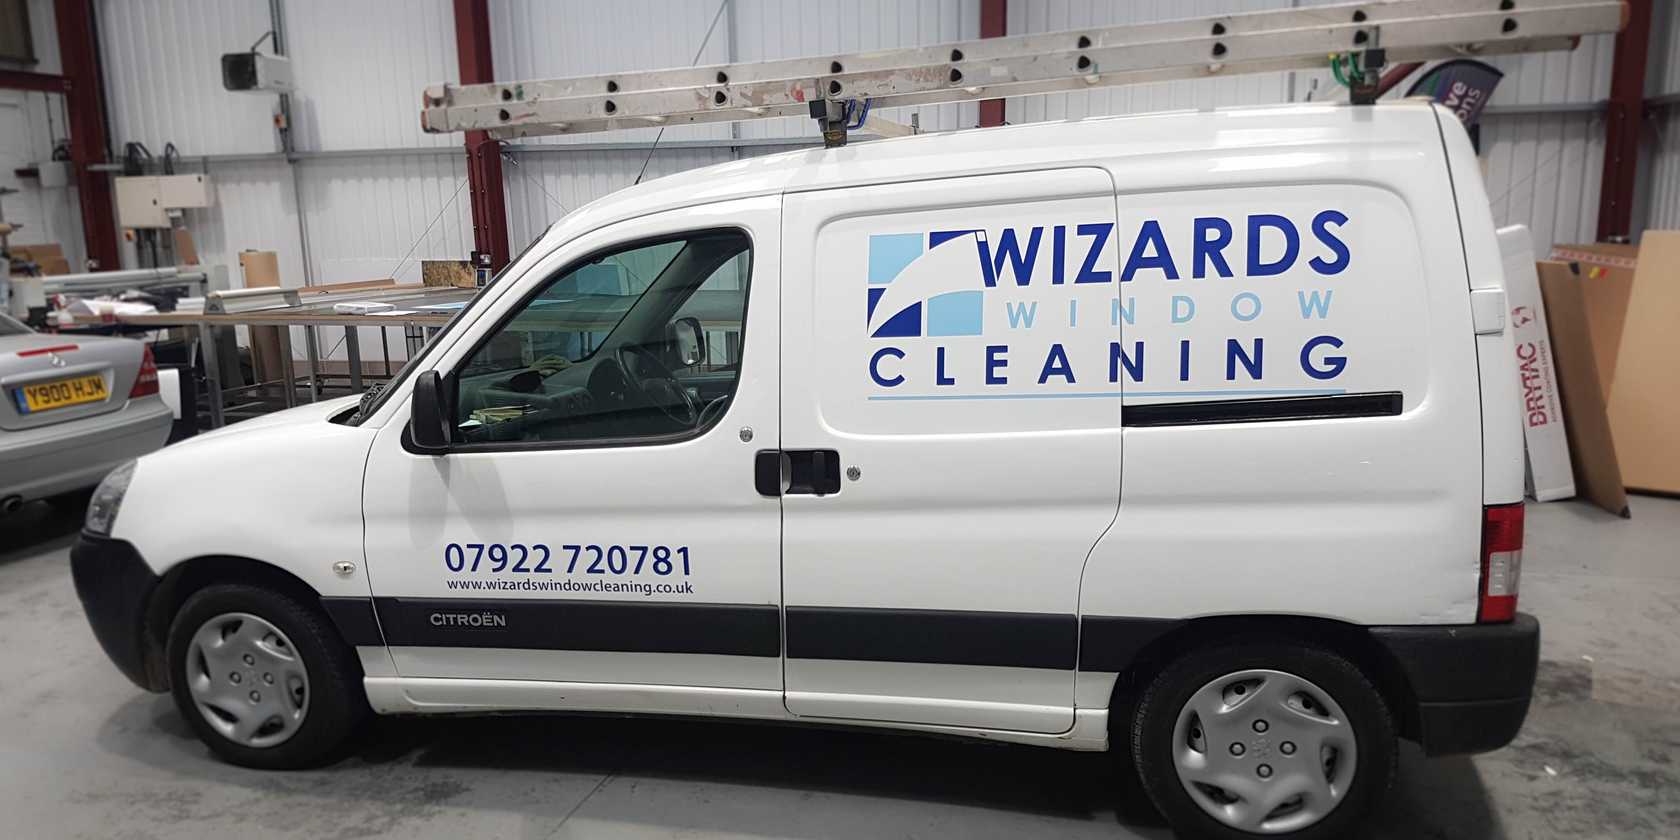 Vehicle Graphics for Wizards Window Cleaning